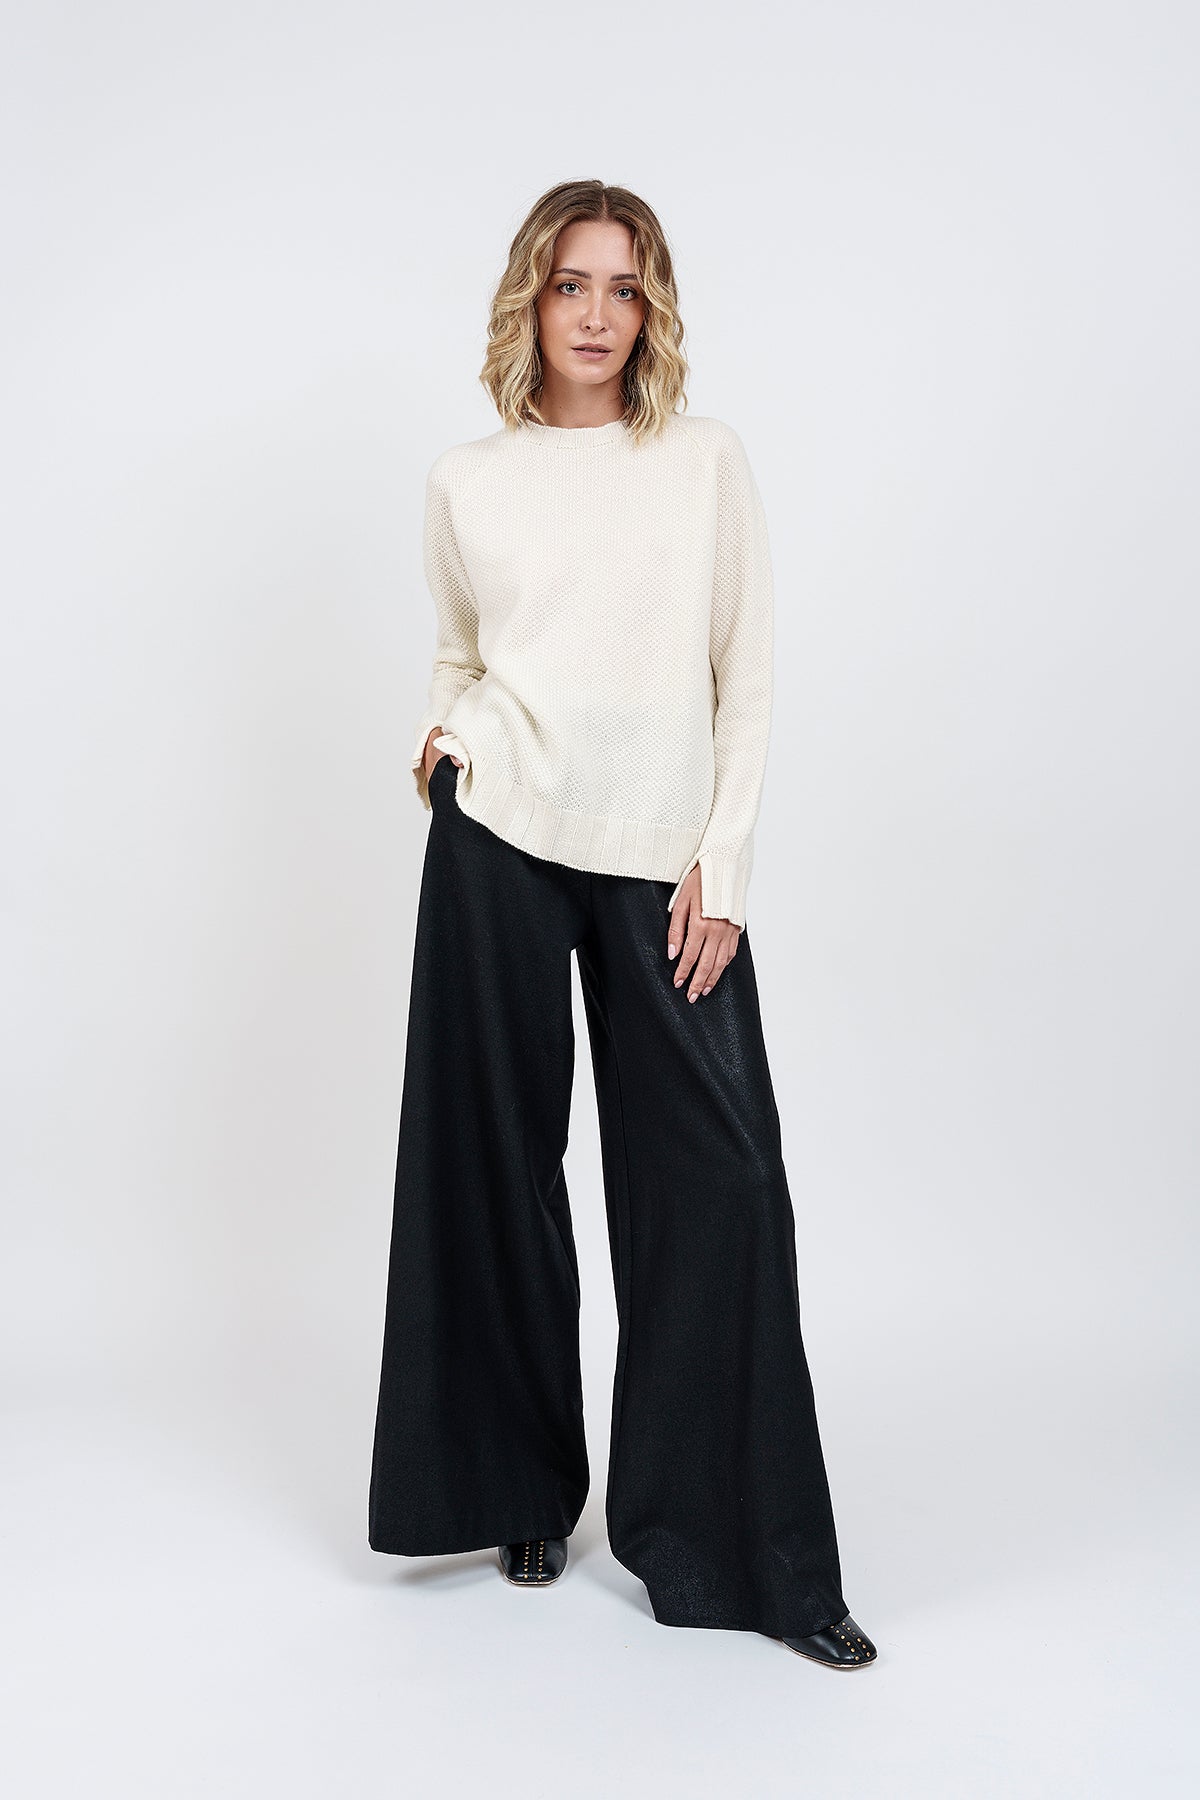 MUST HAVE TROUSERS in laminated wool